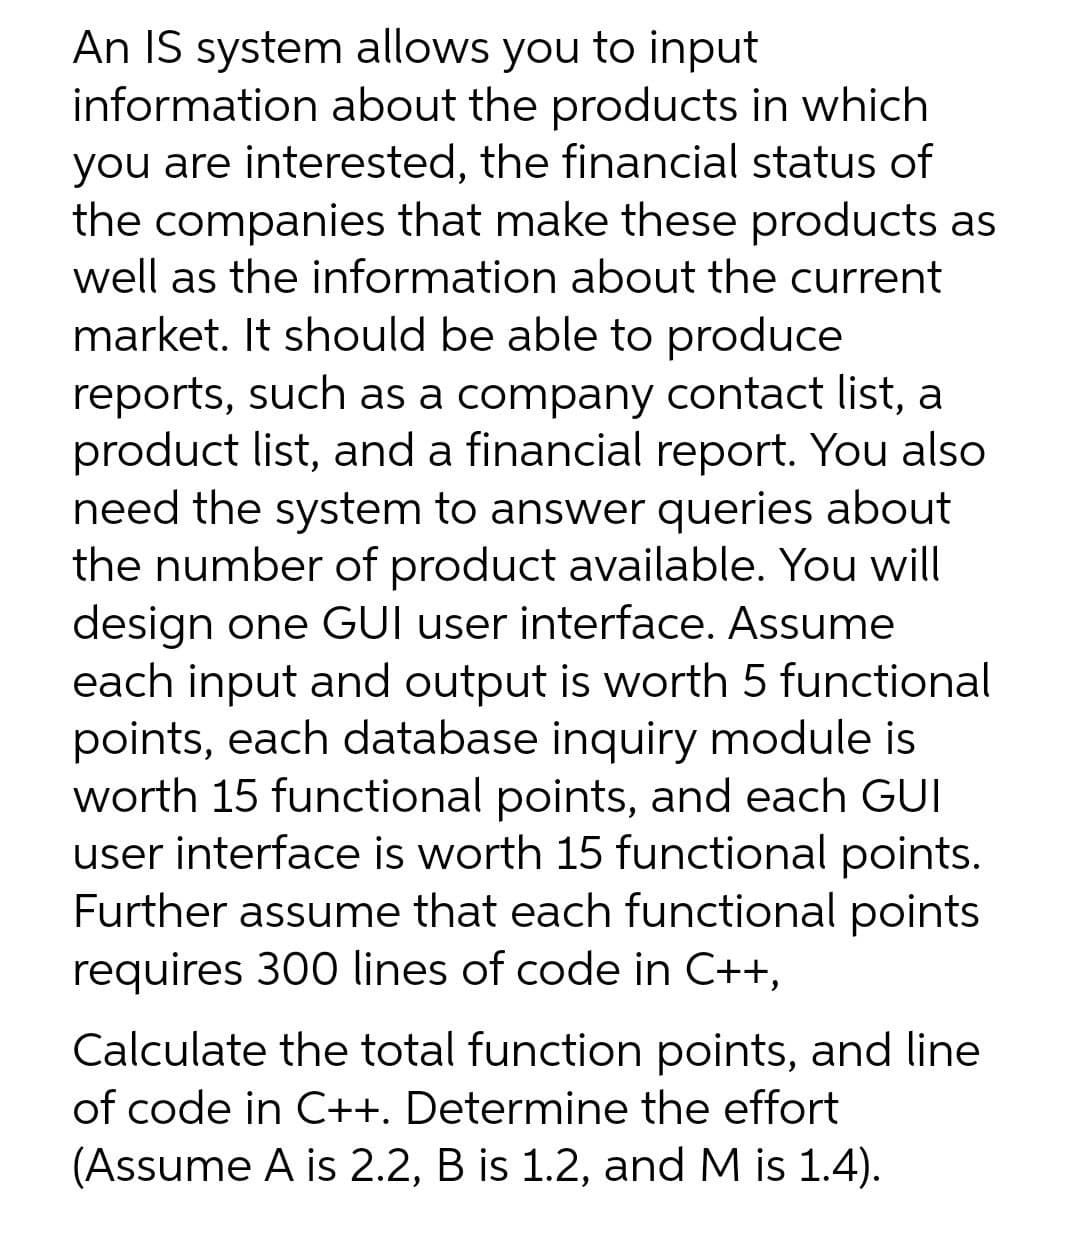 An IS system allows you to input
information about the products in which
you are interested, the financial status of
the companies that make these products as
well as the information about the current
market. It should be able to produce
reports, such as a company contact list, a
product list, and a financial report. You also
need the system to answer queries about
the number of product available. You will
design one GUI user interface. Assume
each input and output is worth 5 functional
points, each database inquiry module is
worth 15 functional points, and each GUI
user interface is worth 15 functional points.
Further assume that each functional points
requires 300 lines of code in C++,
Calculate the total function points, and line
of code in C++. Determine the effort
(Assume A is 2.2, B is 1.2, and M is 1.4).